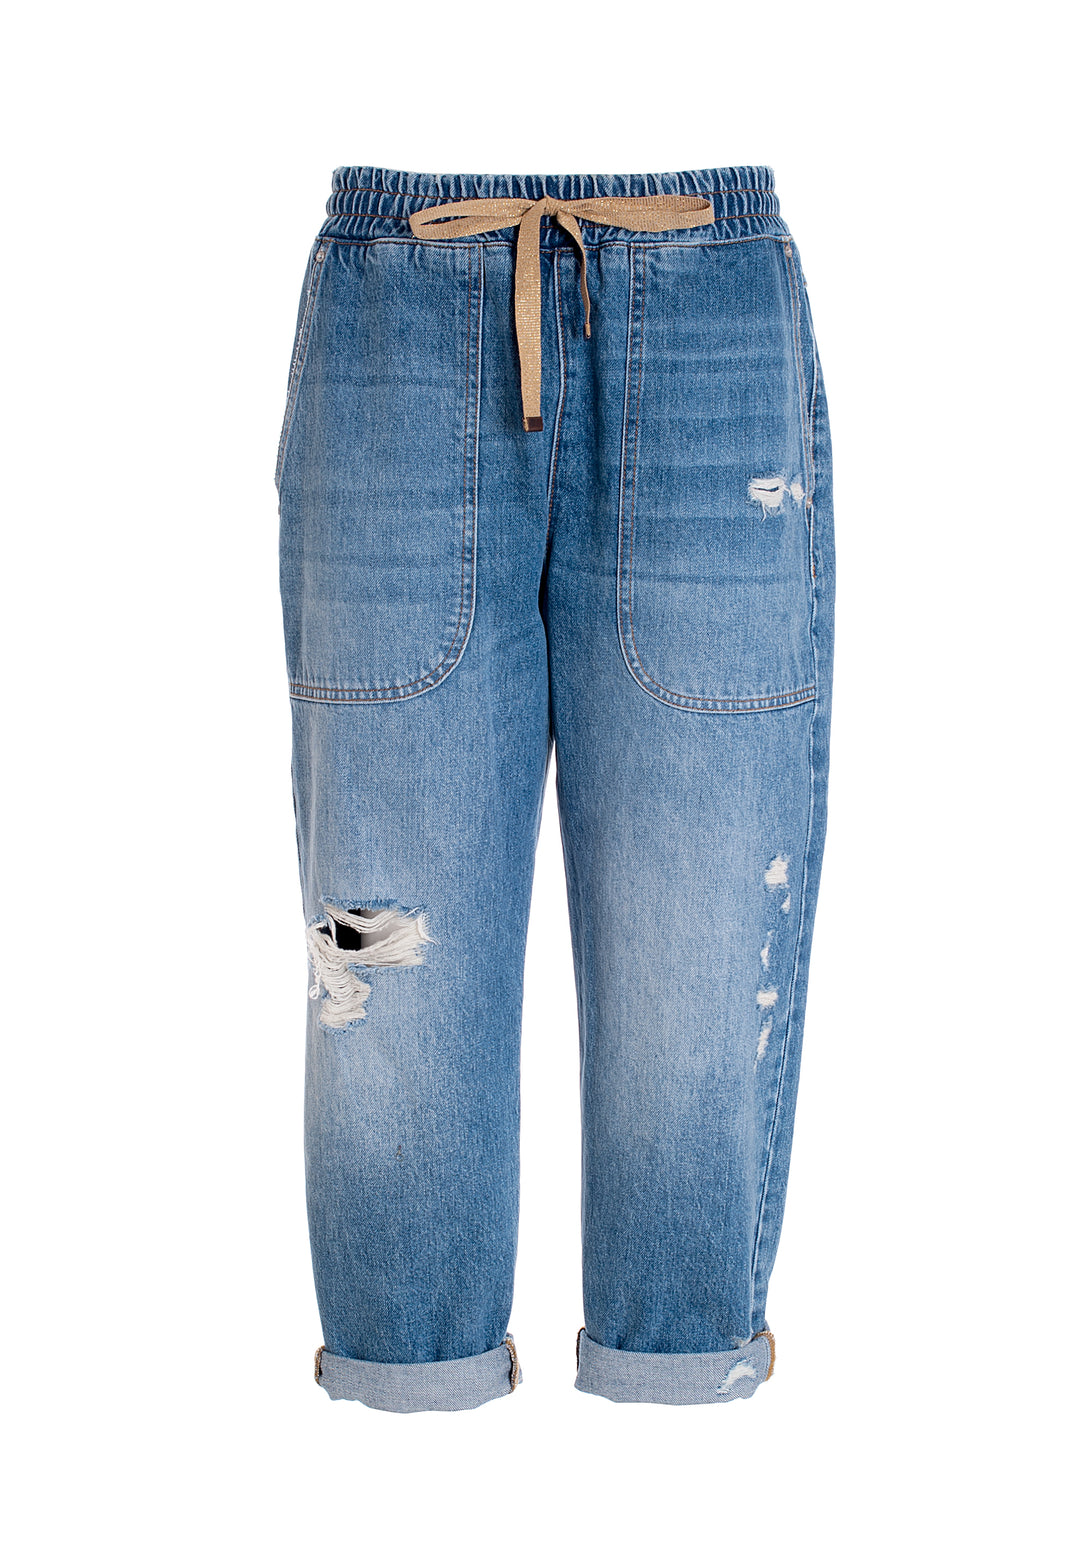 Pant straight leg made in denim with middle wash